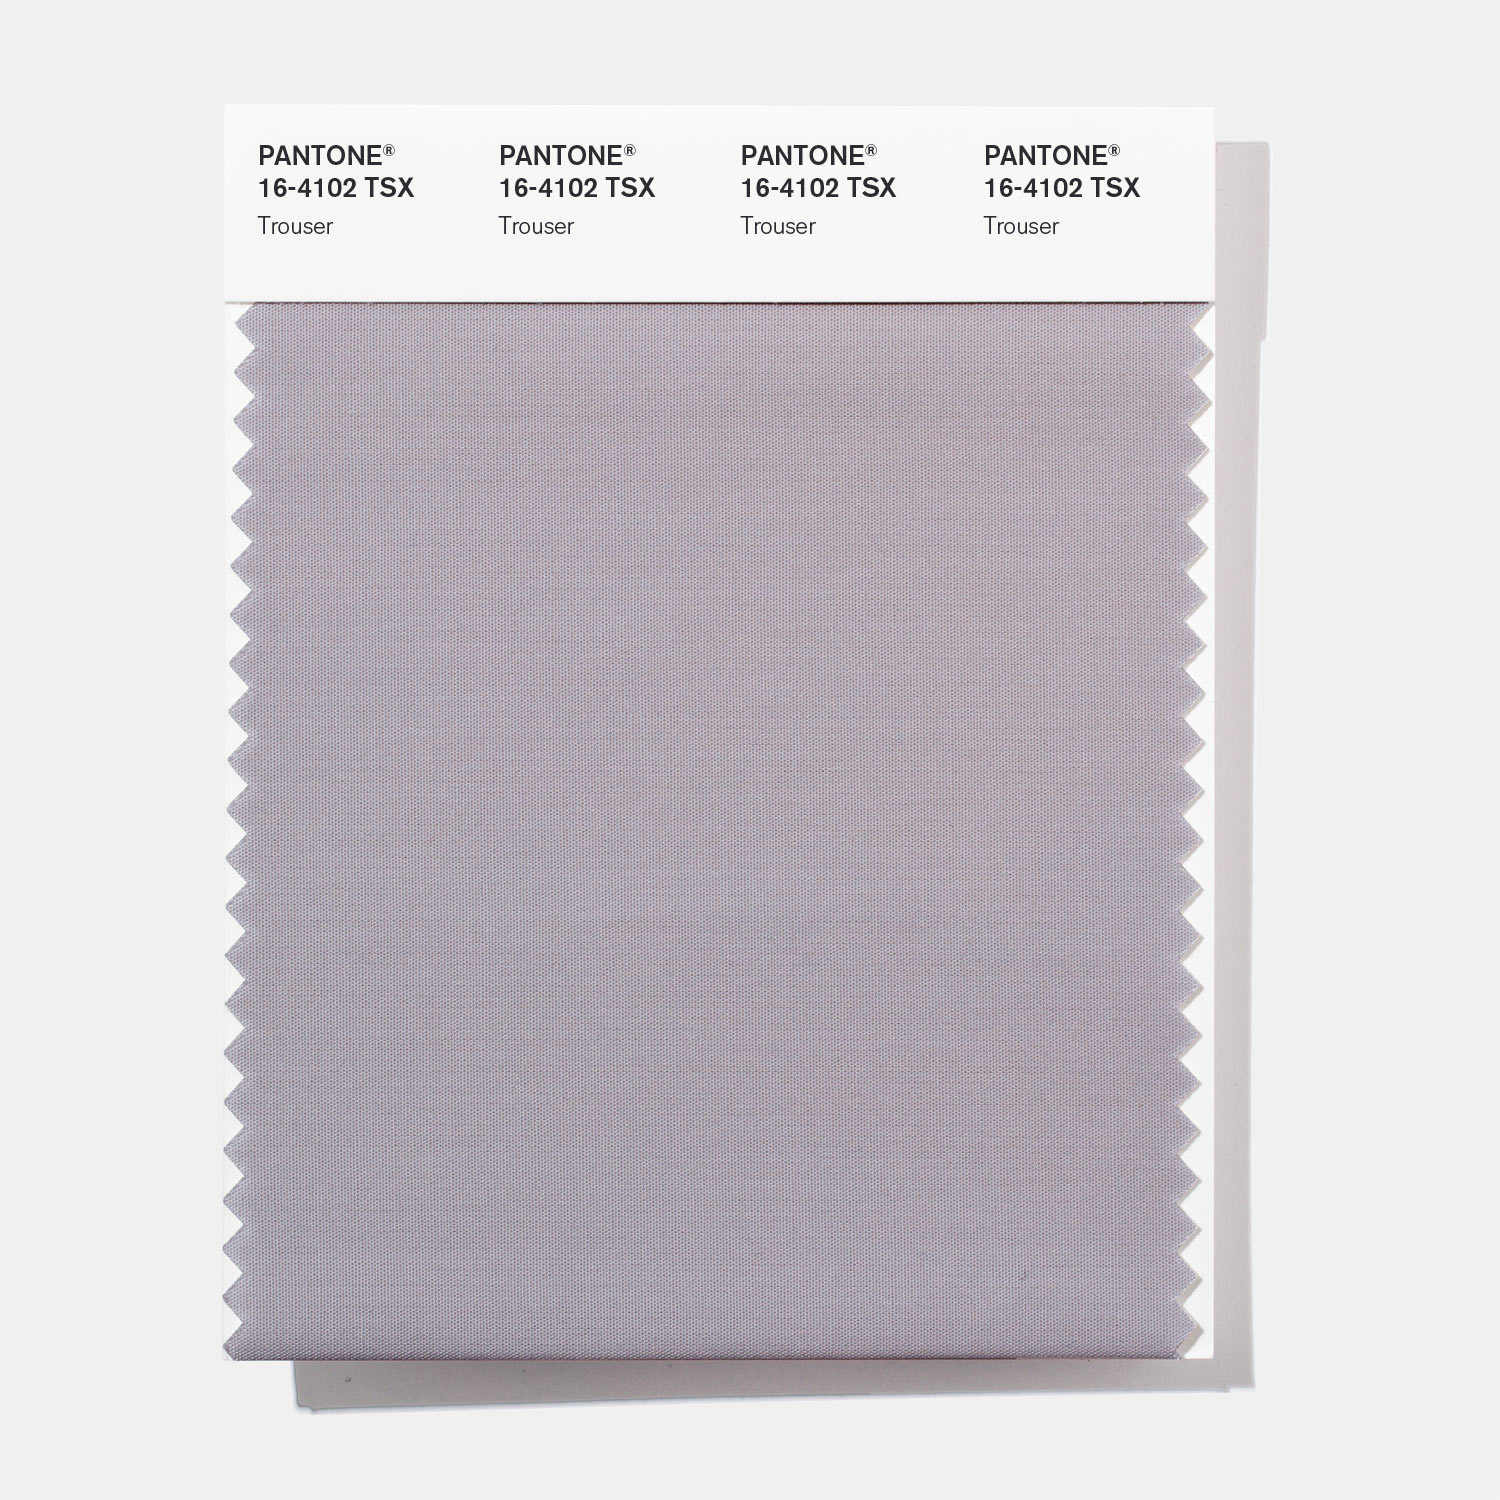 Pantone Polyester Swatch 16-4102 Trouser